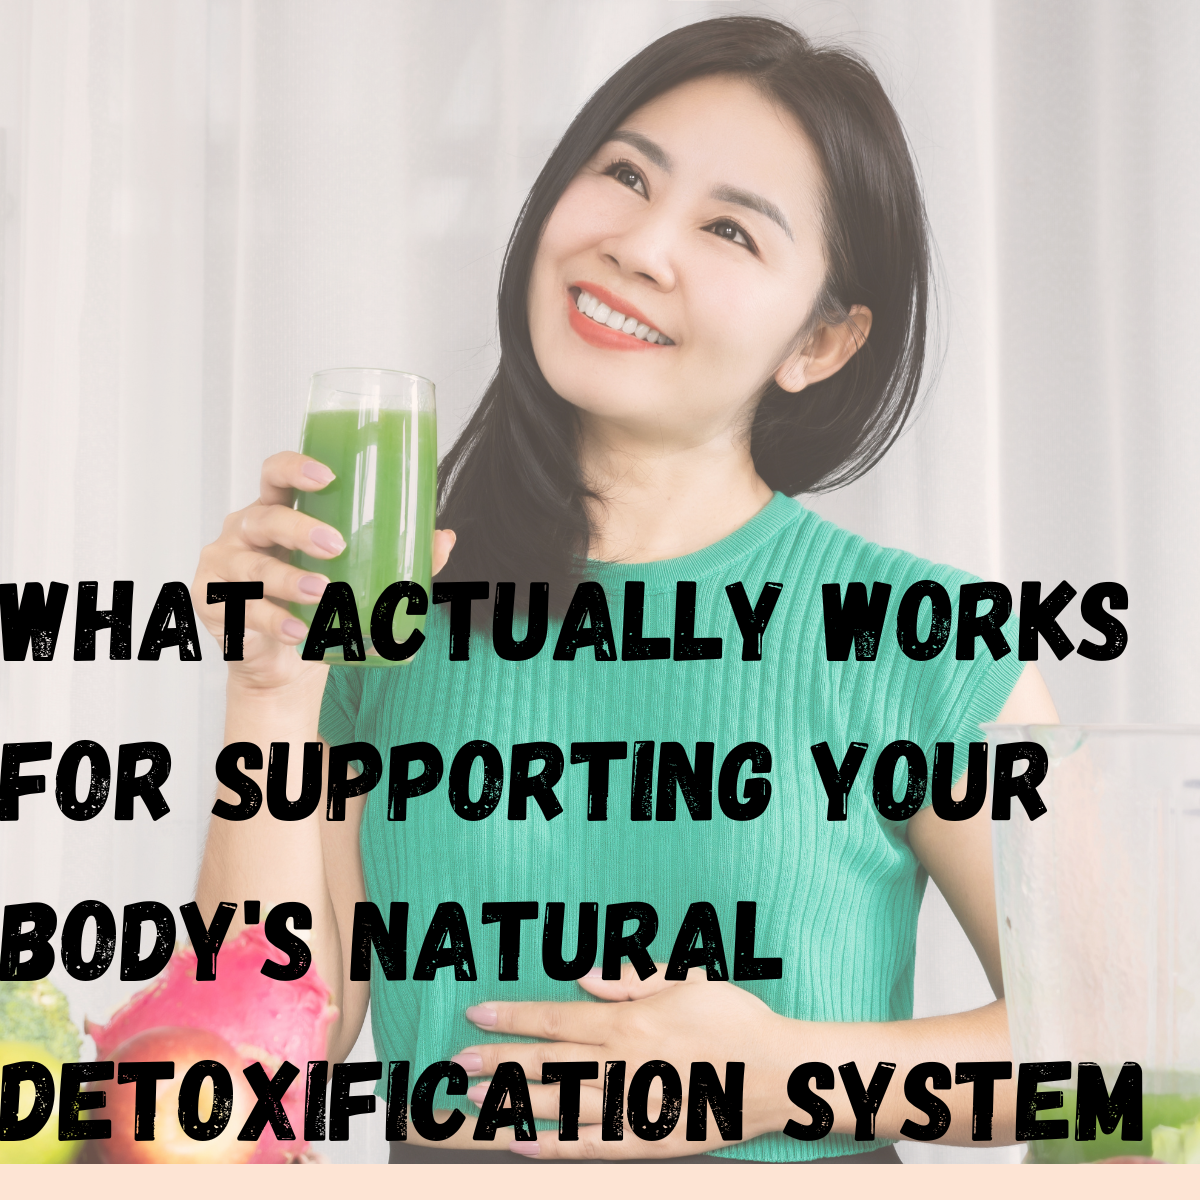 what actually works for supporting your body's natural detoxification system